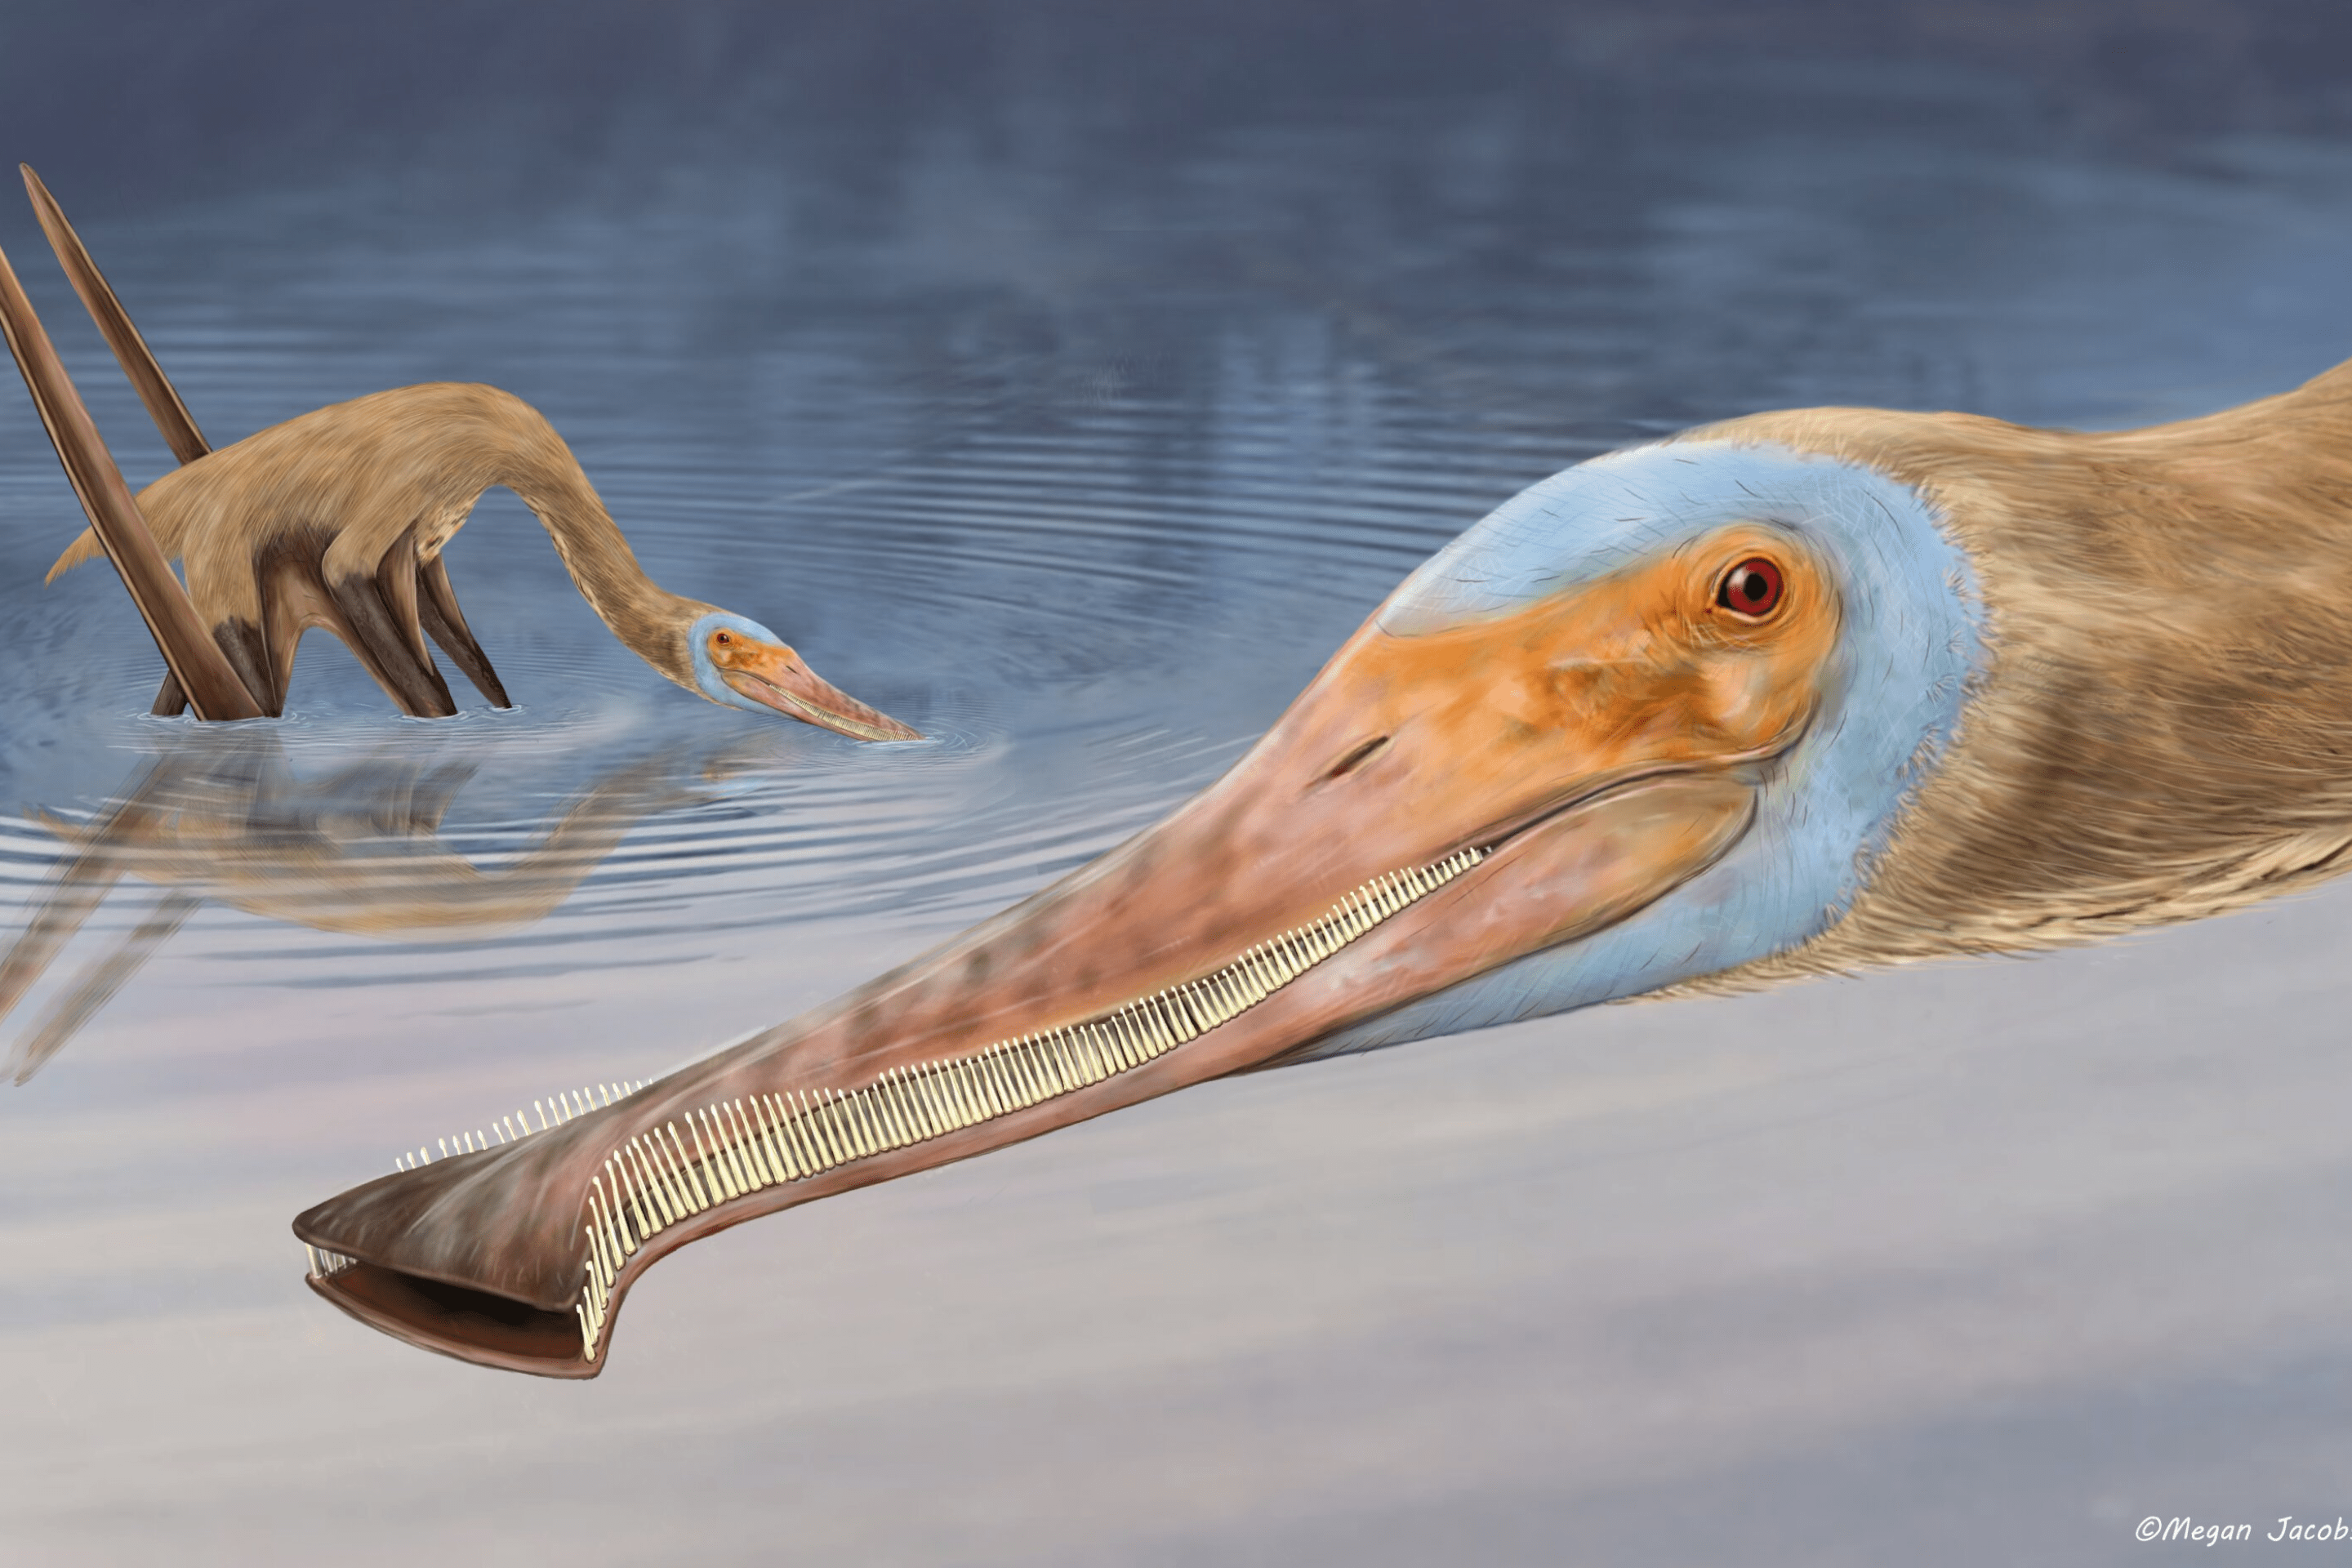 A paleoart illustration of the pterosaur Balaenognathus maeuseri, showing a creature with a long bill that tapers to a flat end, lots of tiny verticle teeth, and a red beady eye staring out from an orange and blue face.